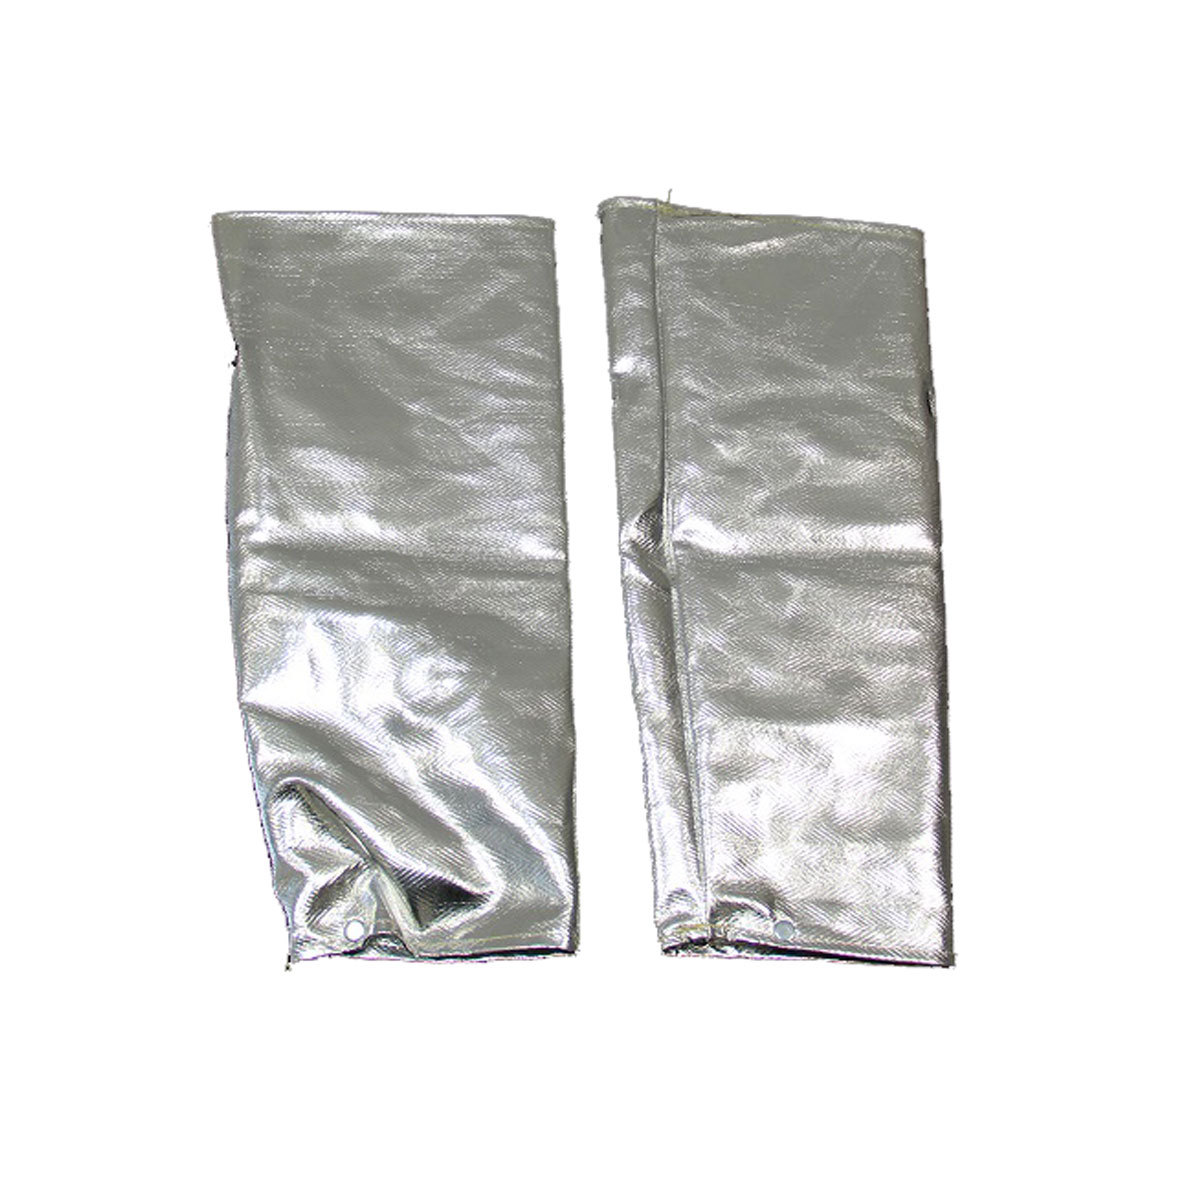 Chicago Protective Apparel Silver Aluminized Rayon Heat Resistant Sleeves